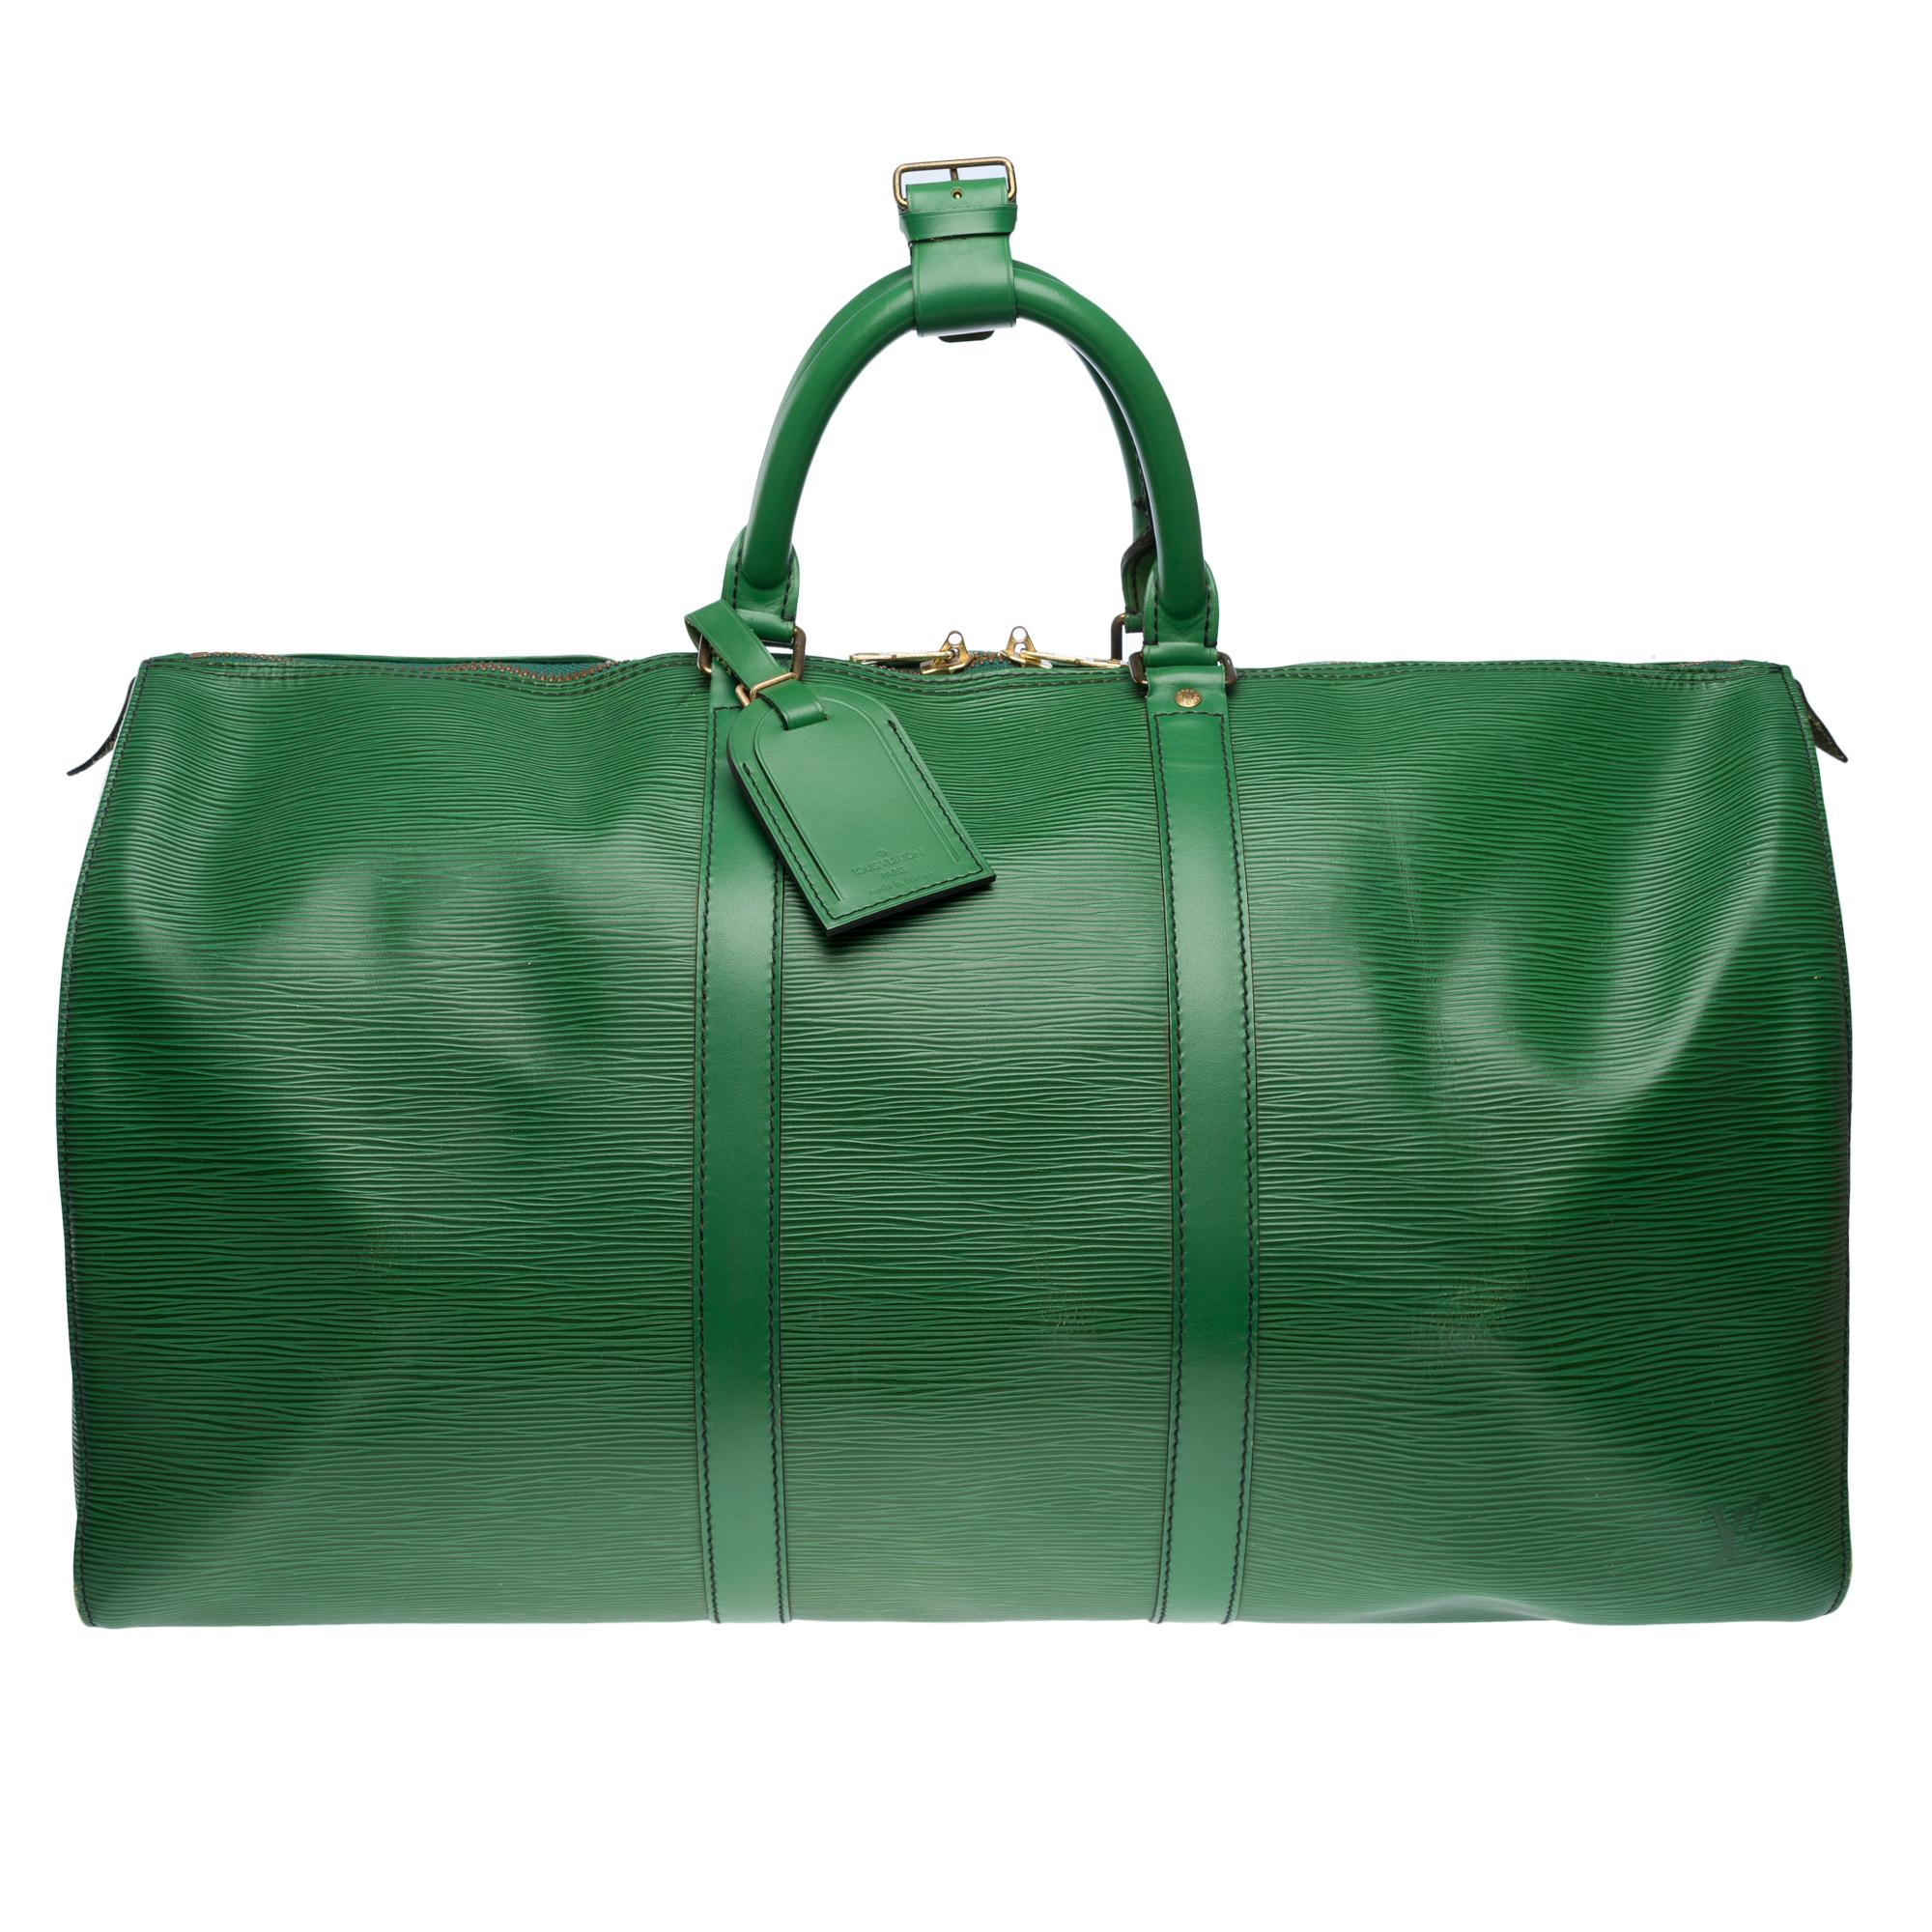 The​ ​very​ ​Chic​ ​travel​ ​bag​ ​Louis​ ​Vuitton​ ​Keepall​ ​50​ ​cm​ ​in​ ​green​ ​epi​ ​leather,​ ​double​ ​zipper​ ​sliders,​ ​double​ ​handle​ ​in​ ​green​ ​leather​ ​for​ ​hand​ ​carry

Zipper
A​ ​side​ ​patch​ ​pocket
Inner​ ​lining​ ​in​